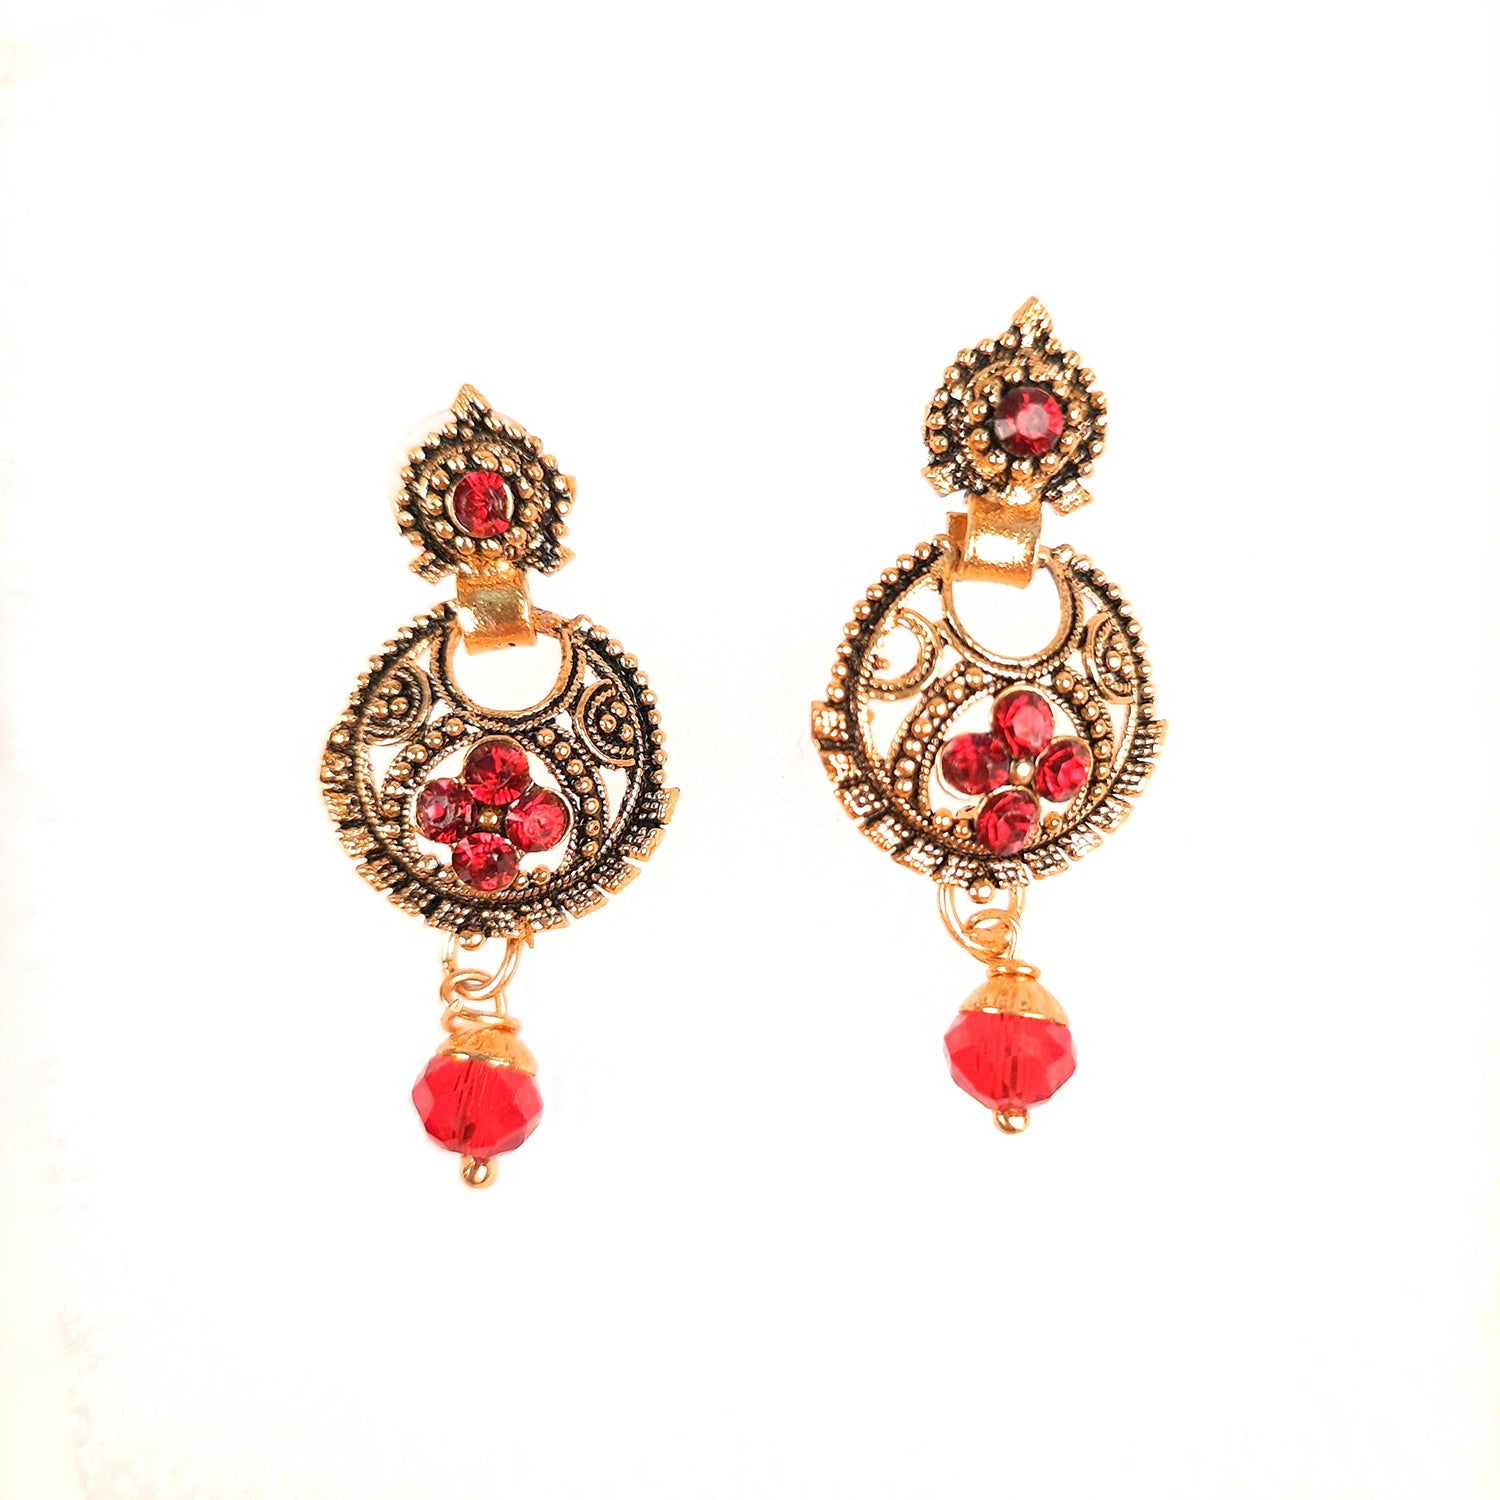 Earrings Jhumka - for Girls and Women | Latest Stylish Fashion Jewellery |  Gifts for Her, Friendship Day, Valentine's Day Gift - Apkamart